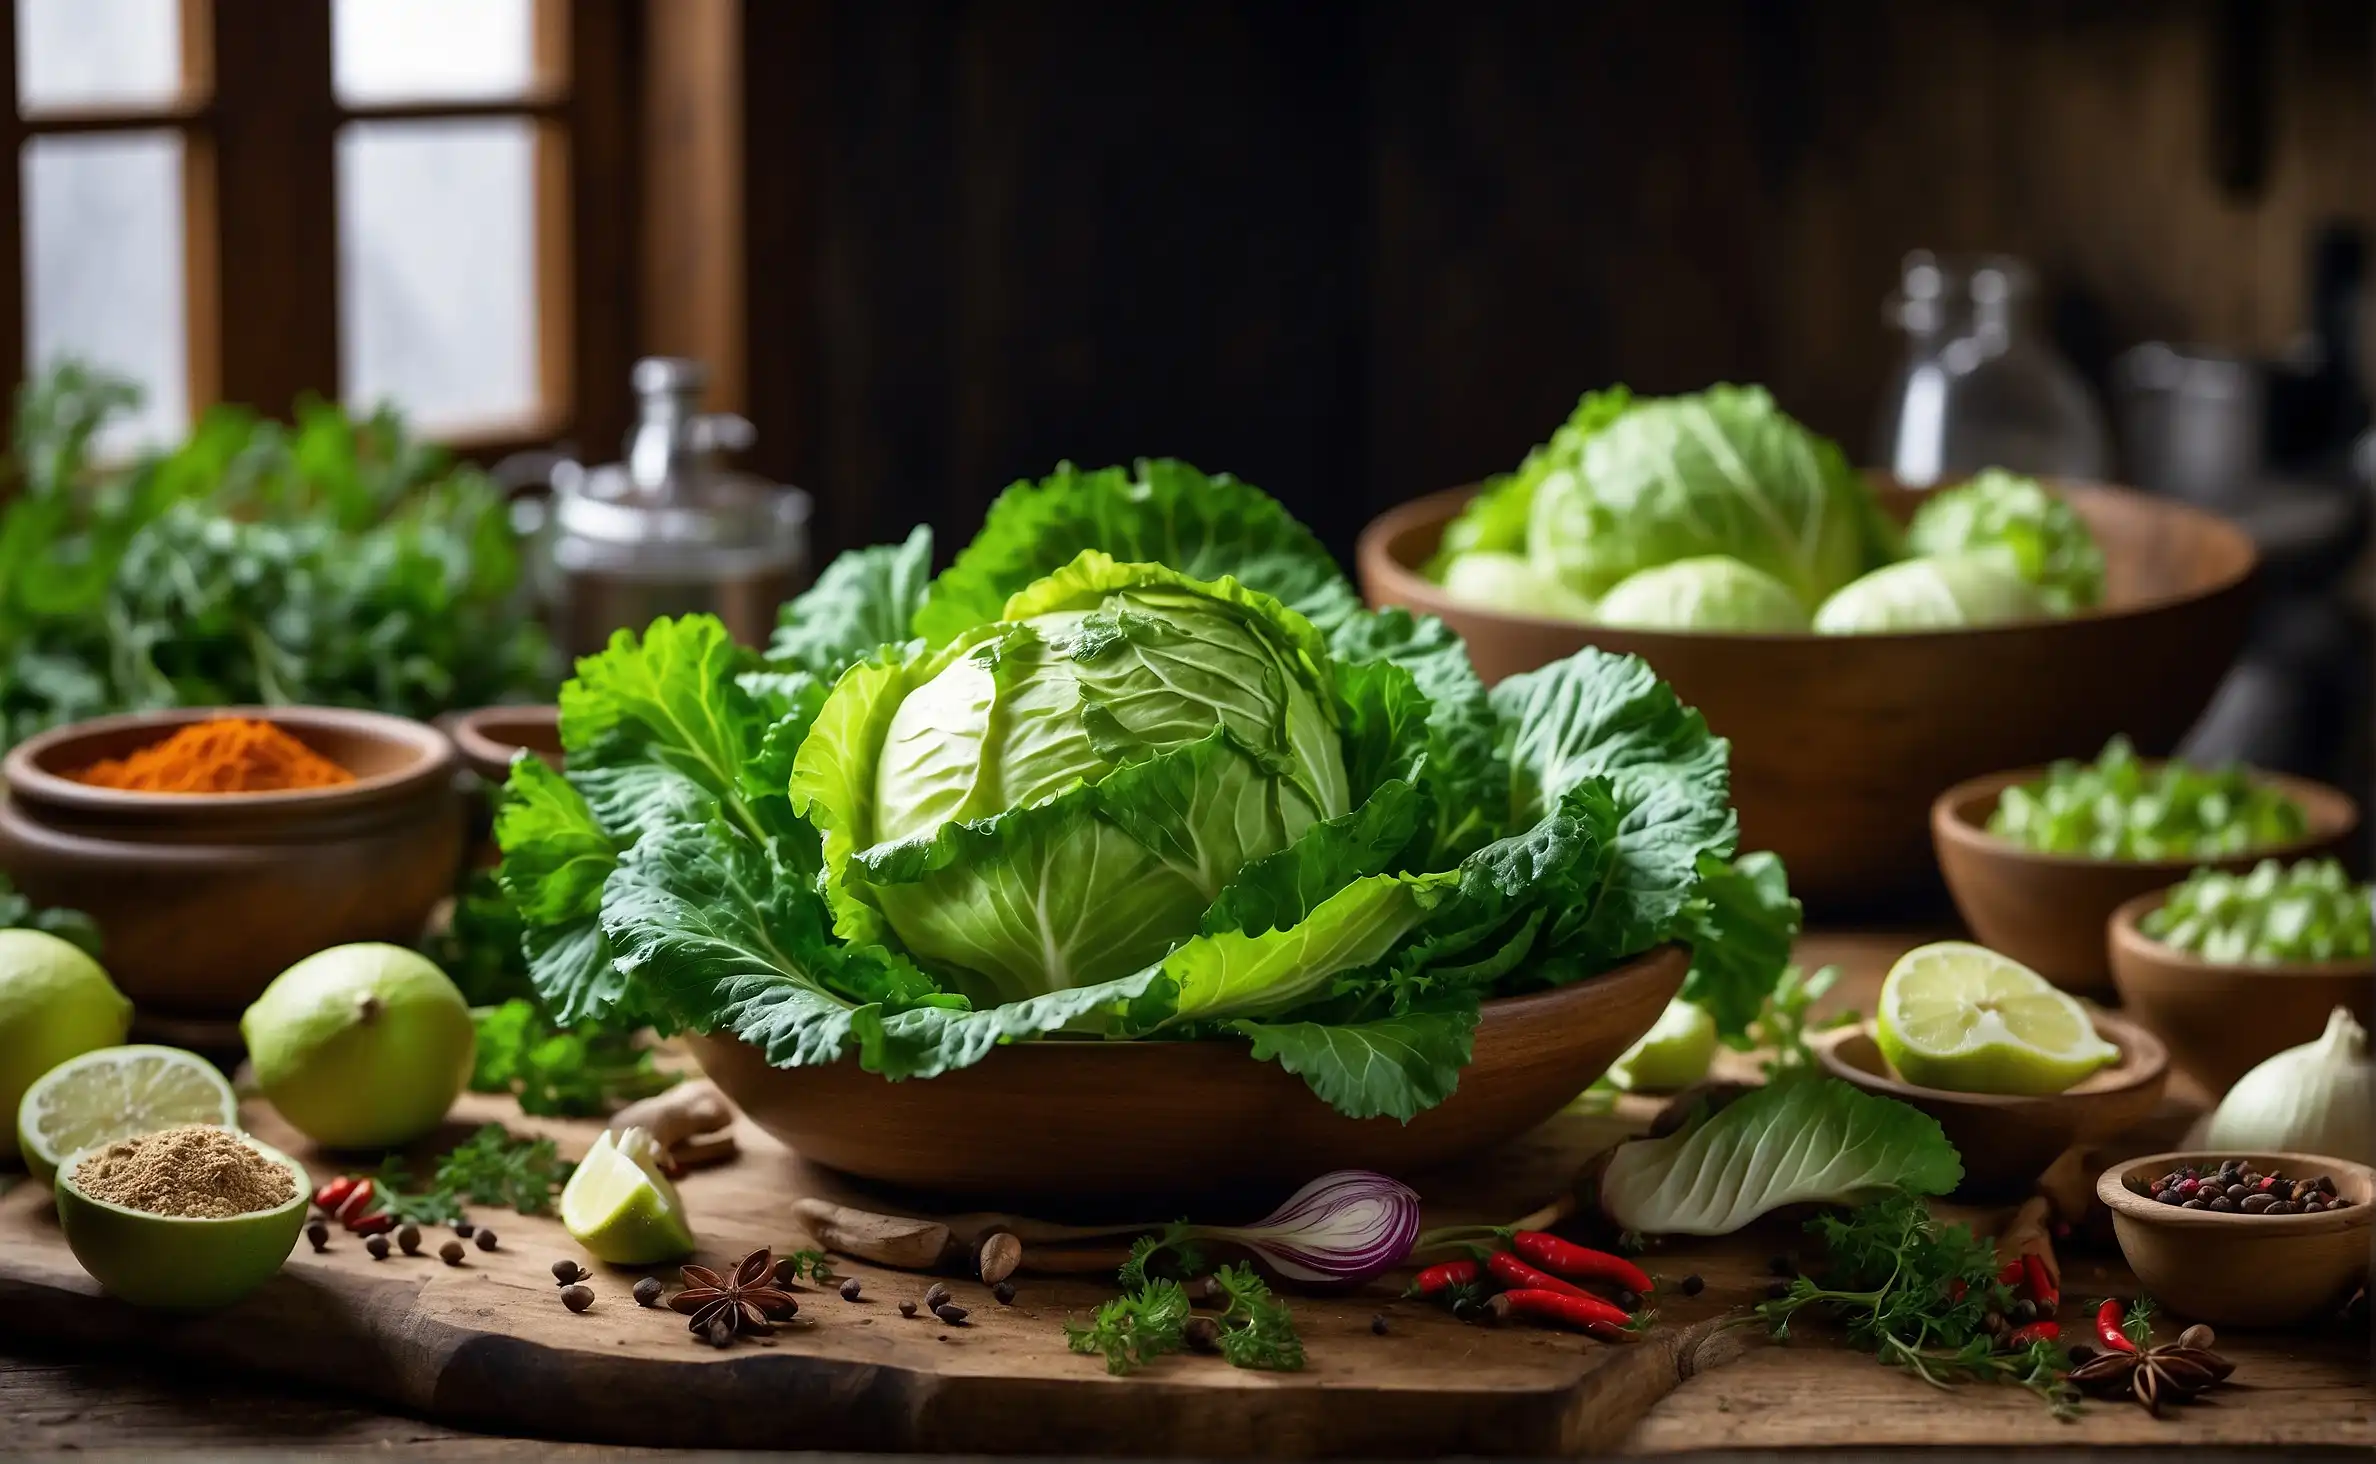 Where to Buy Sour Cabbage Leaves: Sourcing Ingredients